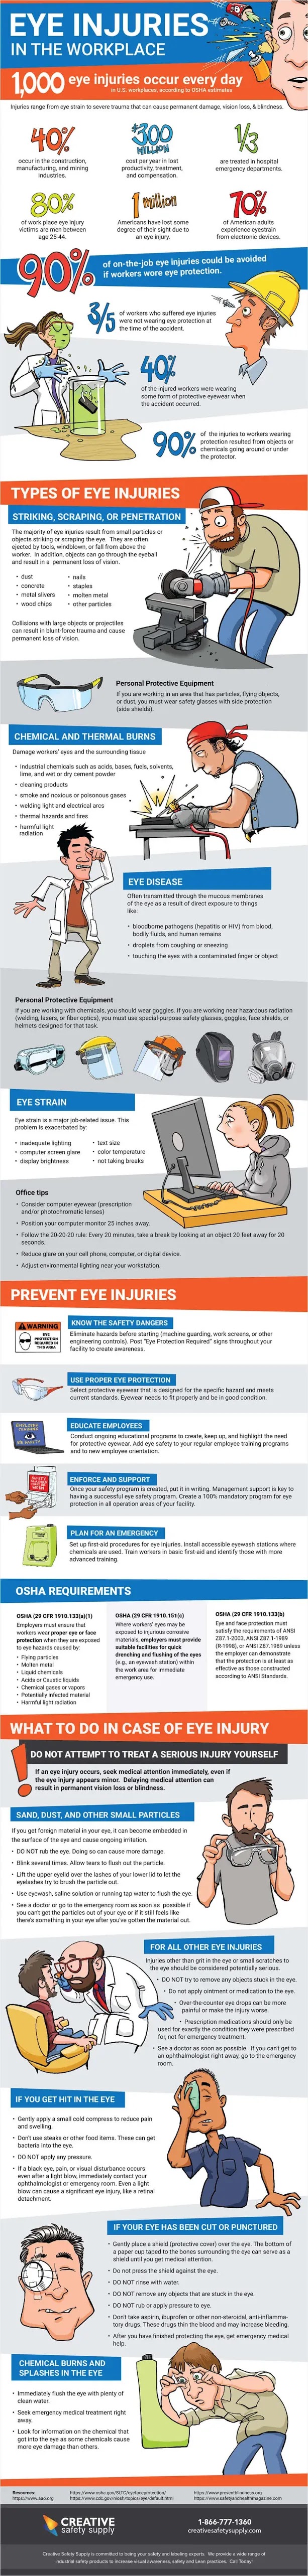 Eye Injuries in the Workplace #infographic